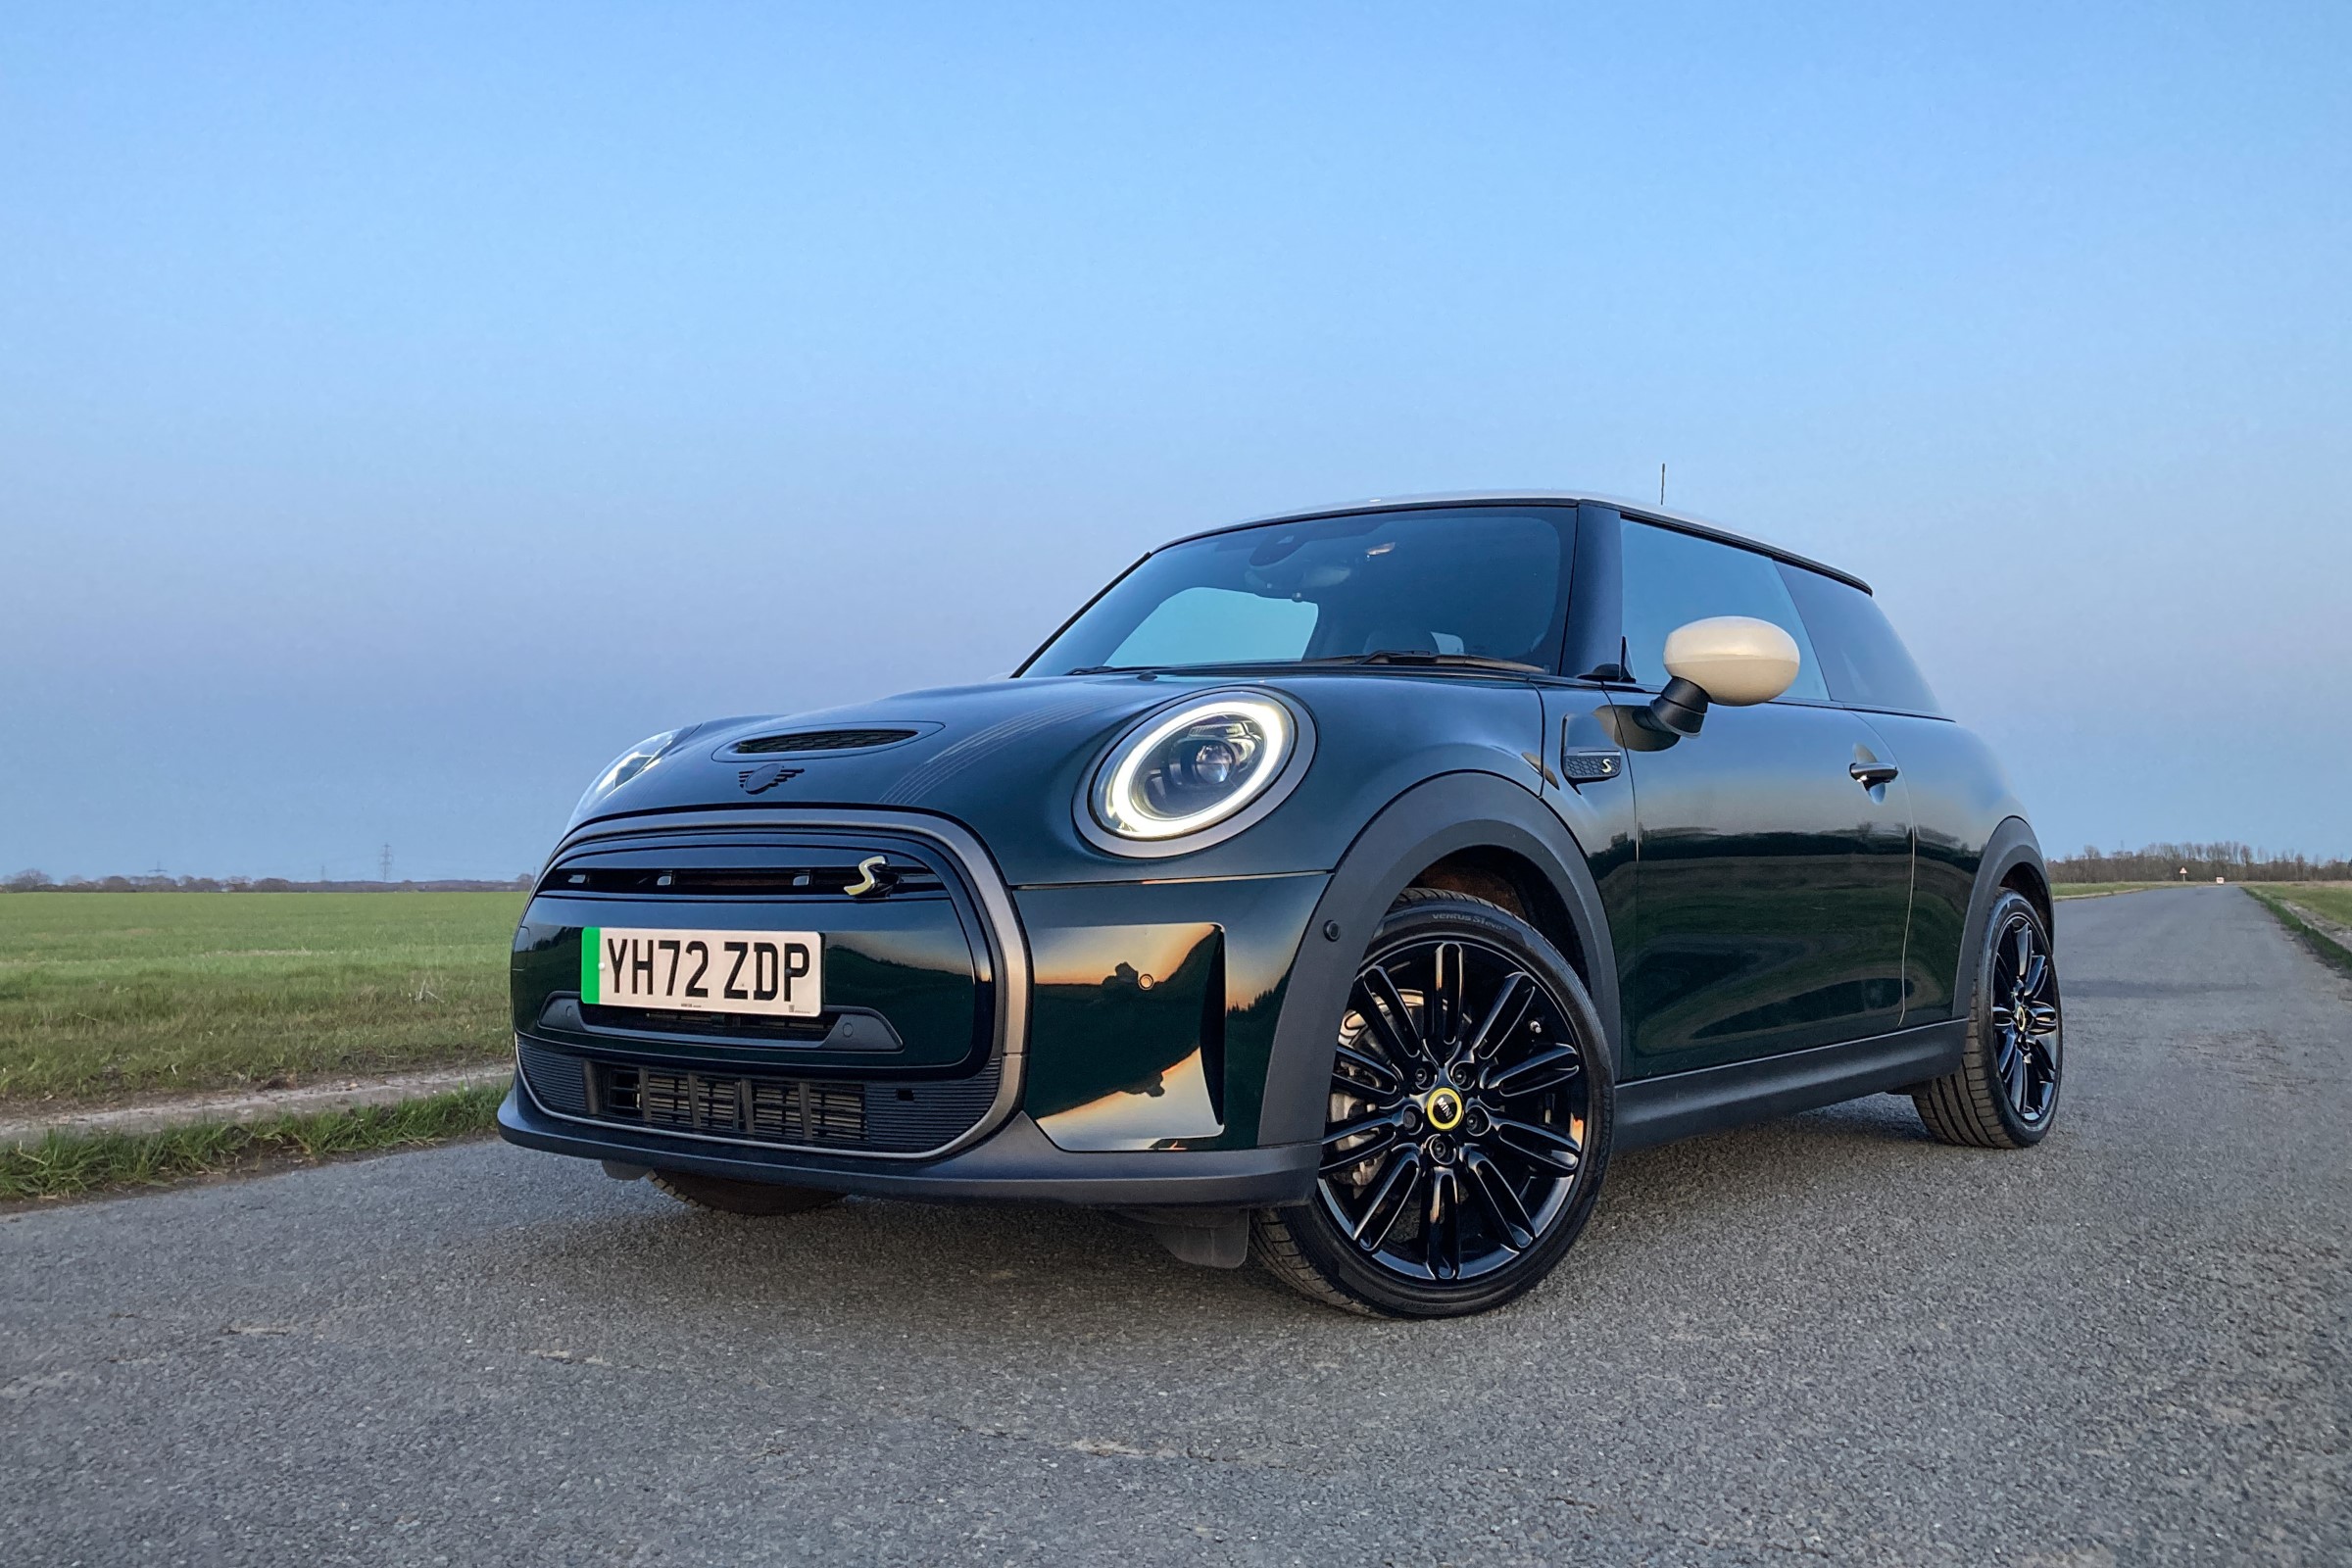 Mini Electric review: Lively drive for those who live locally